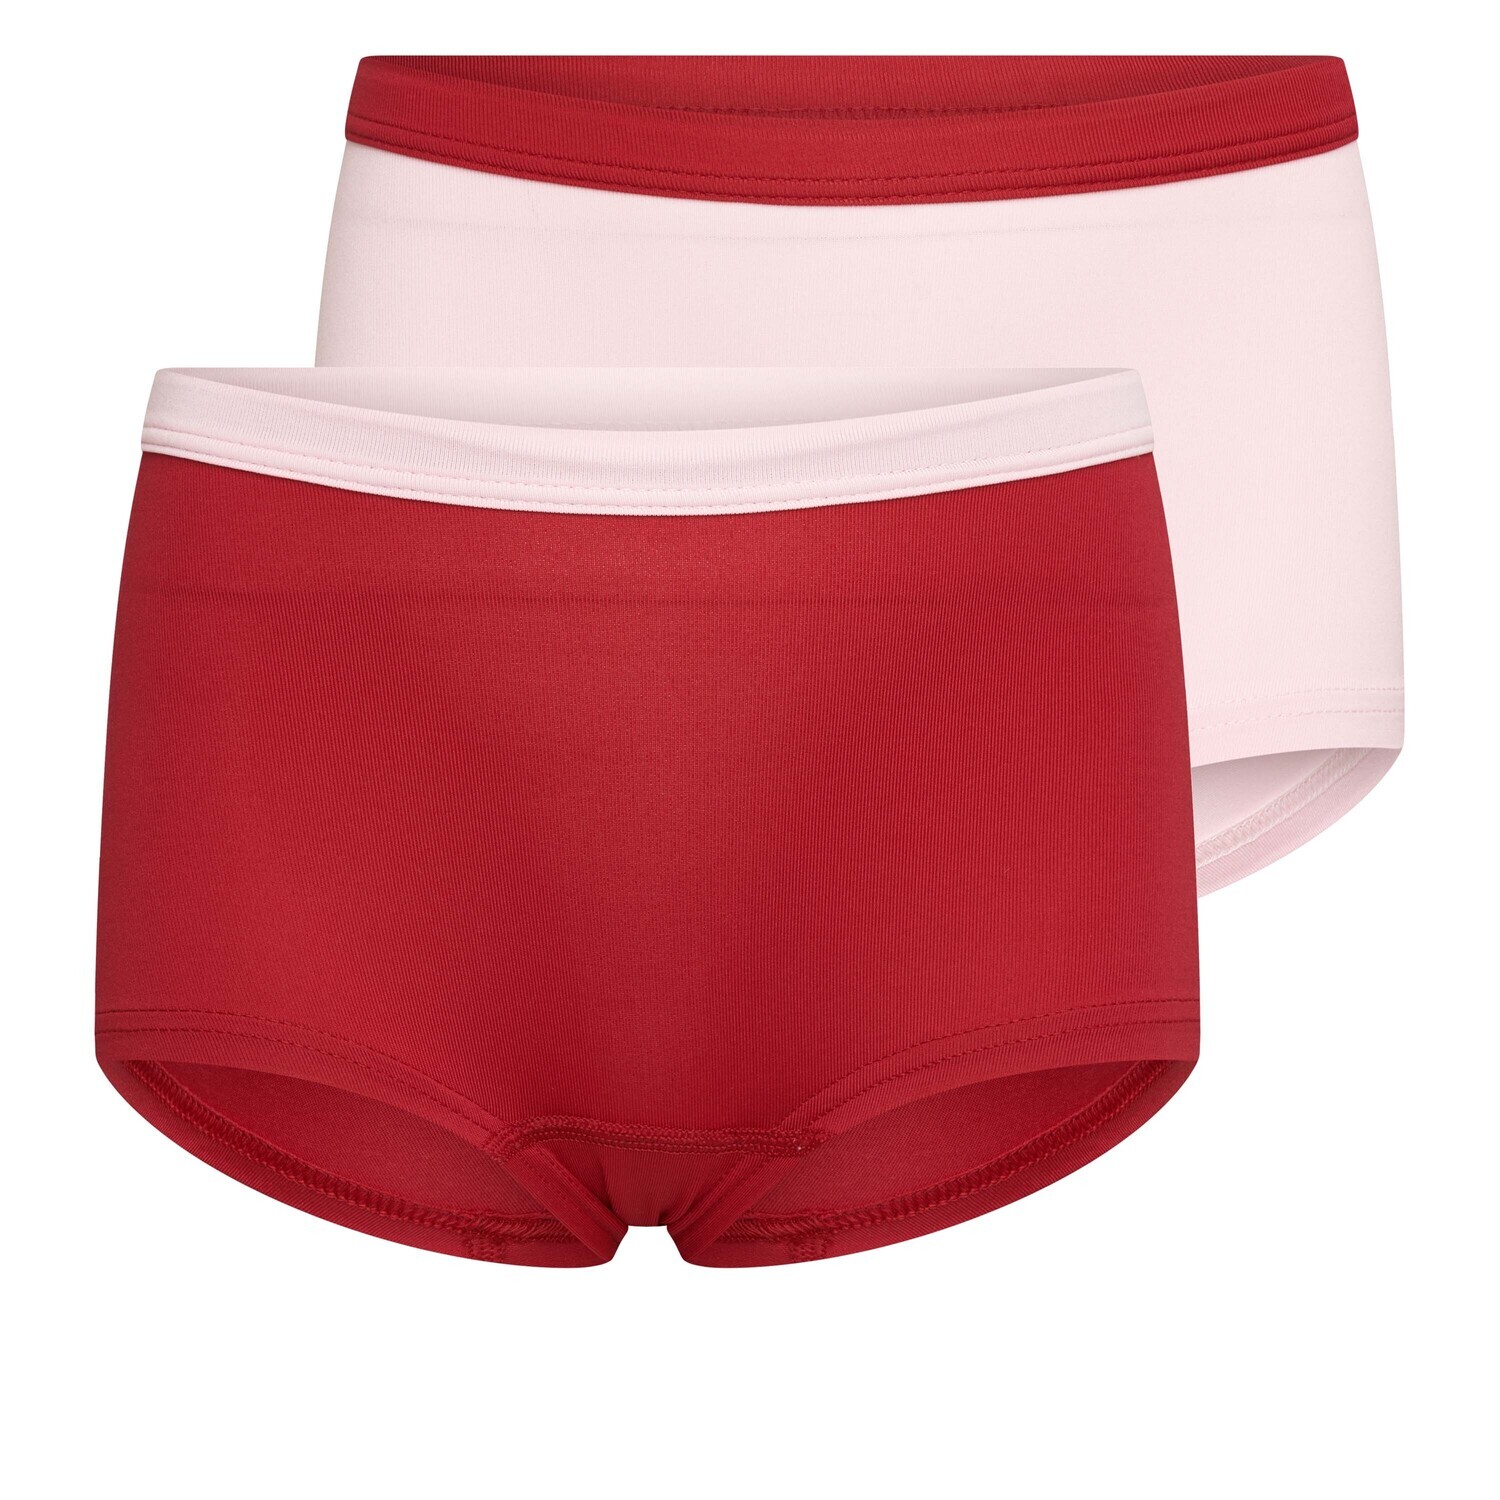 (21-171) Meisjes boxershort Mix and Match 2-Pack rose/rood 122/128